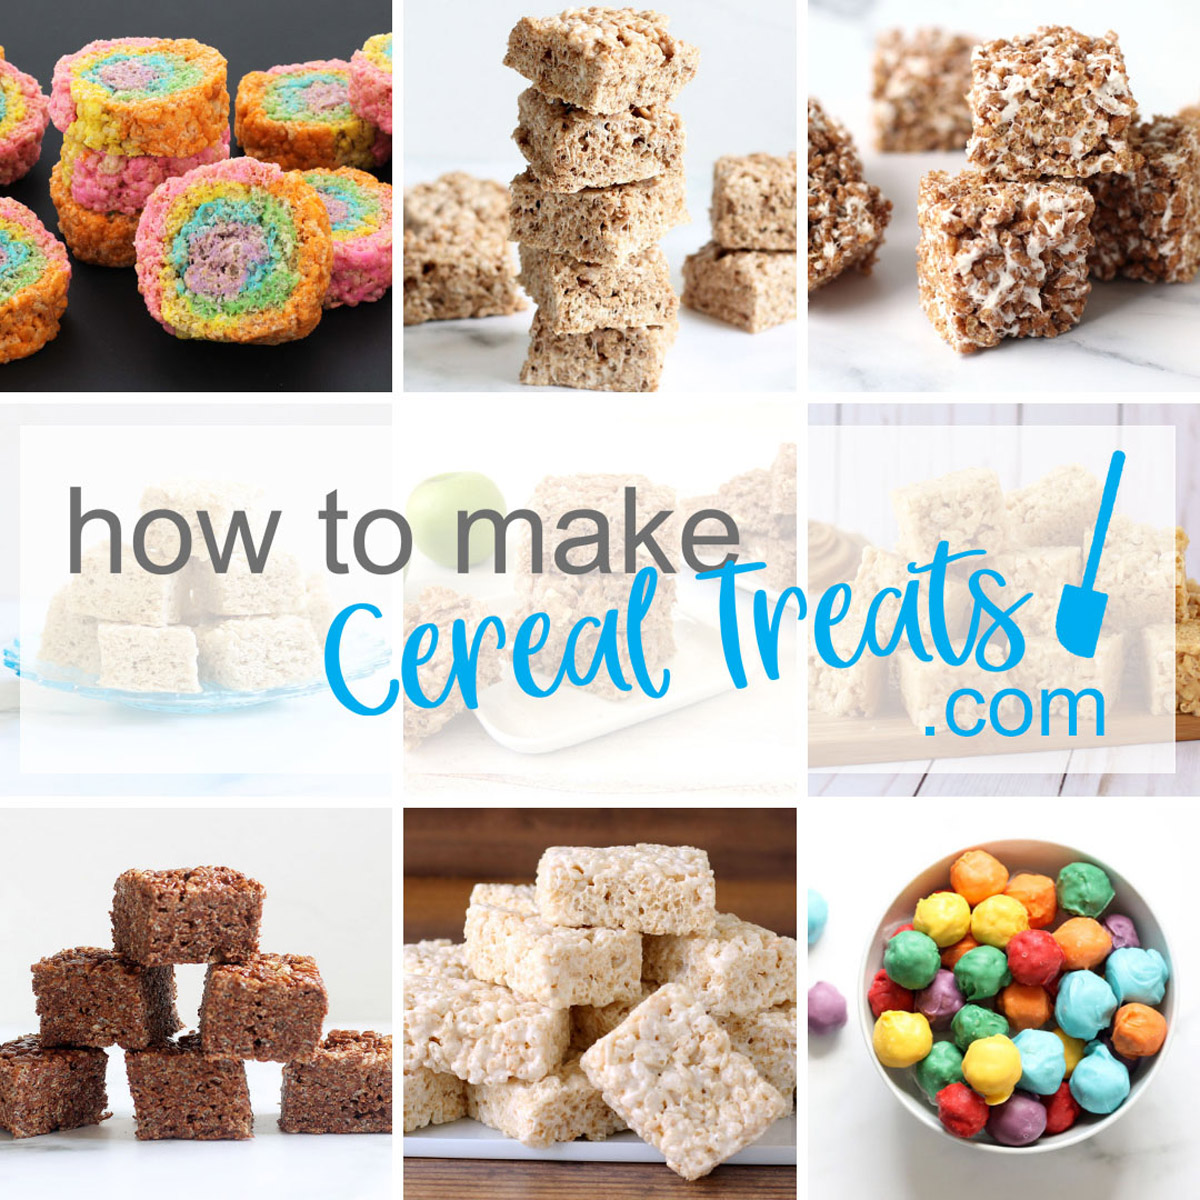 How To Make Cereal Treats - easy Rice Krispie Treat Recipes